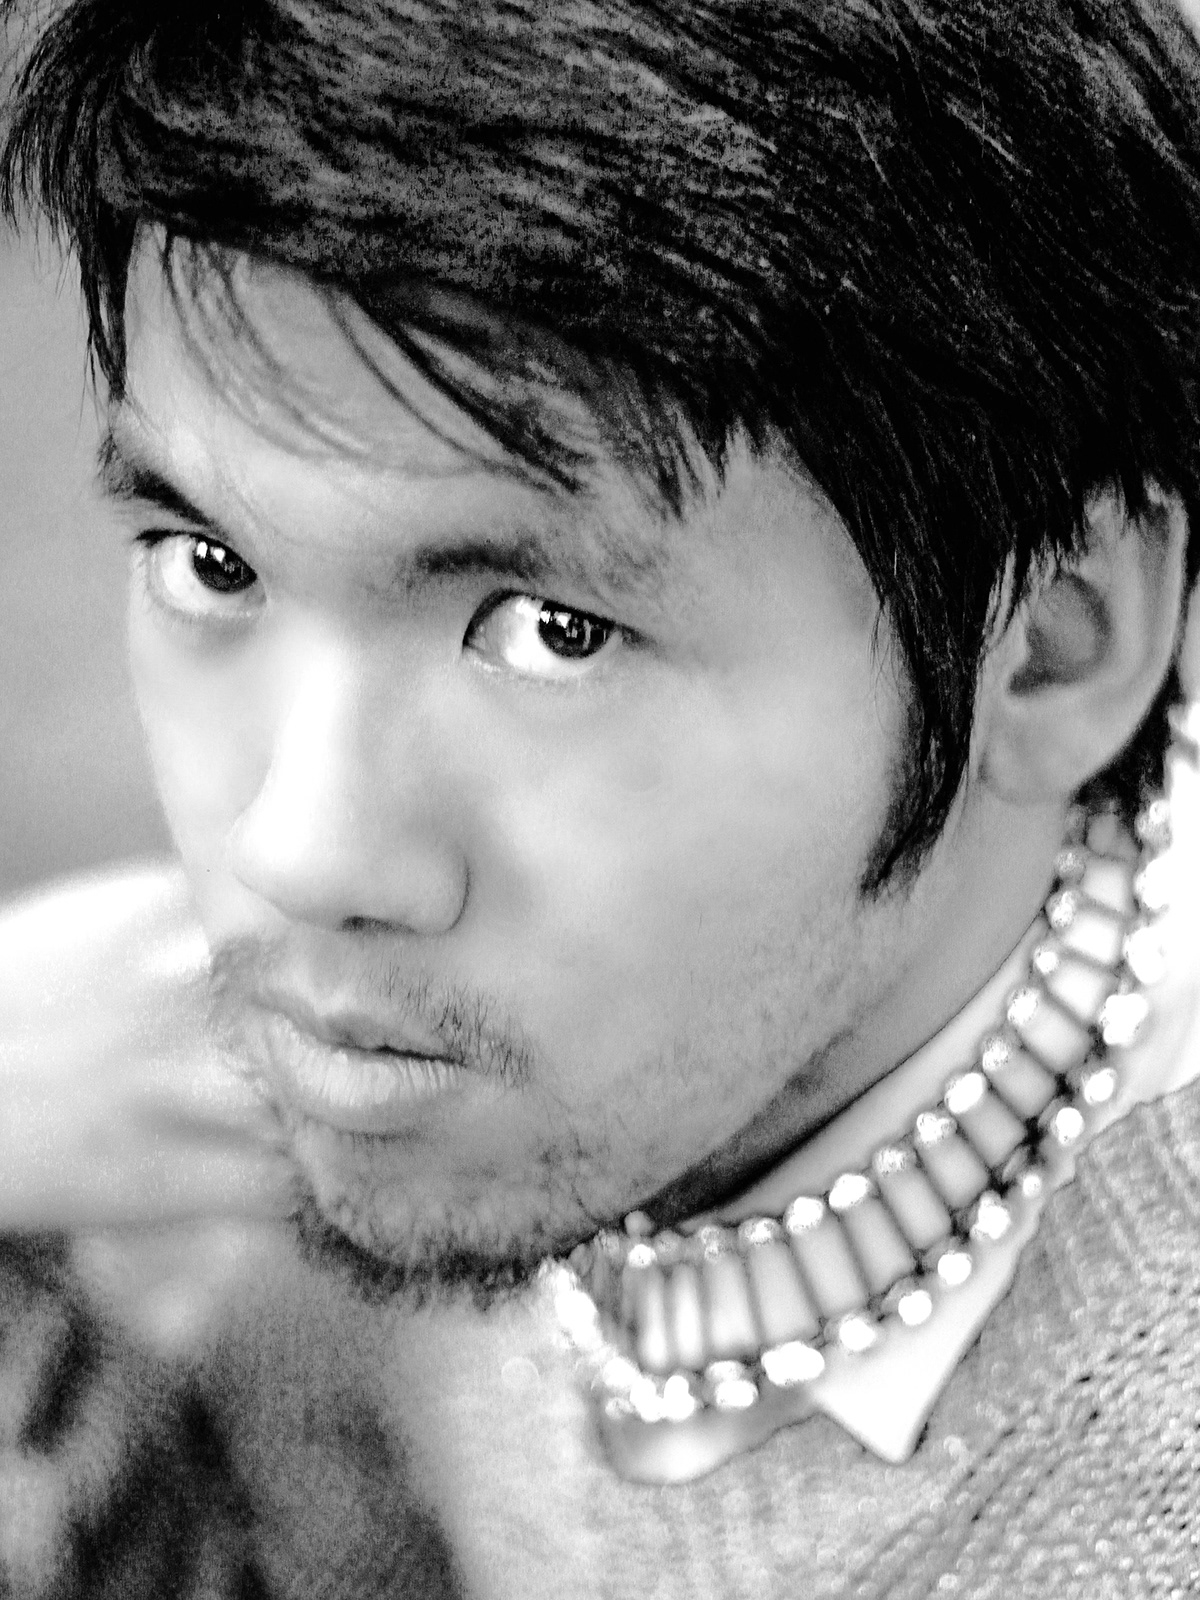 royal sexy man prince charming Handsome Man dreamy portrait black and white glowing